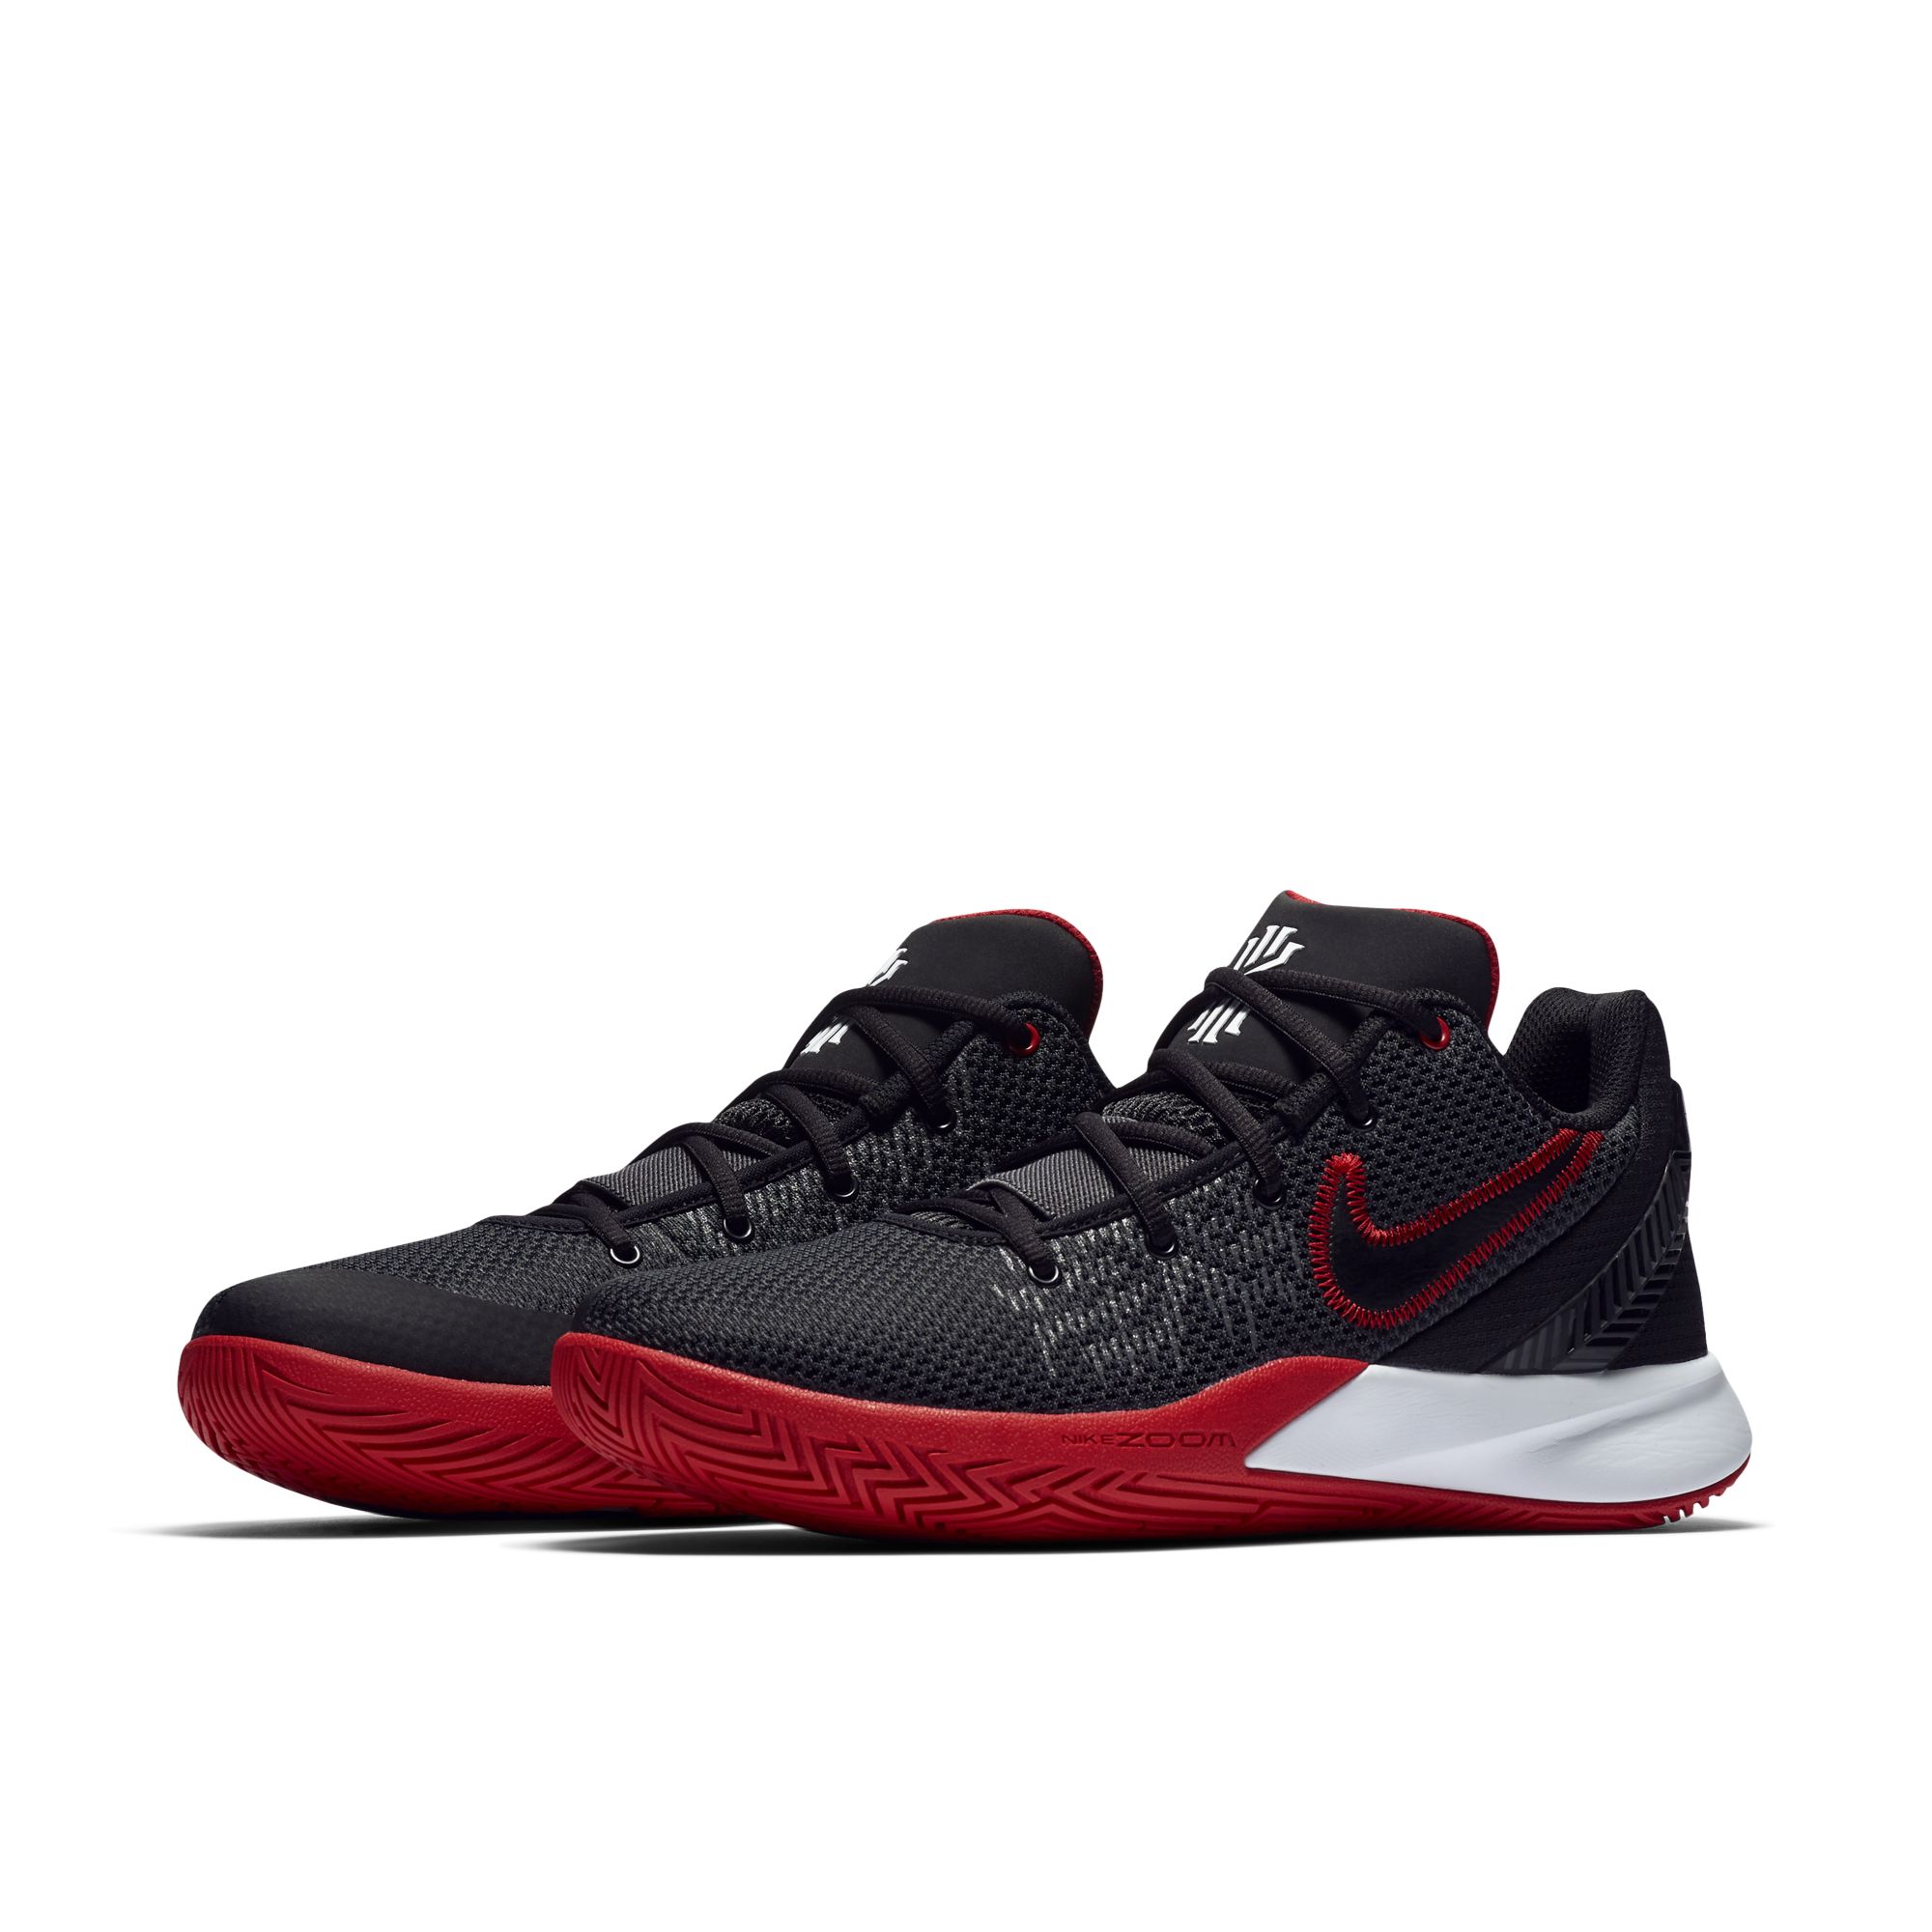 kyrie flytrap 2 red